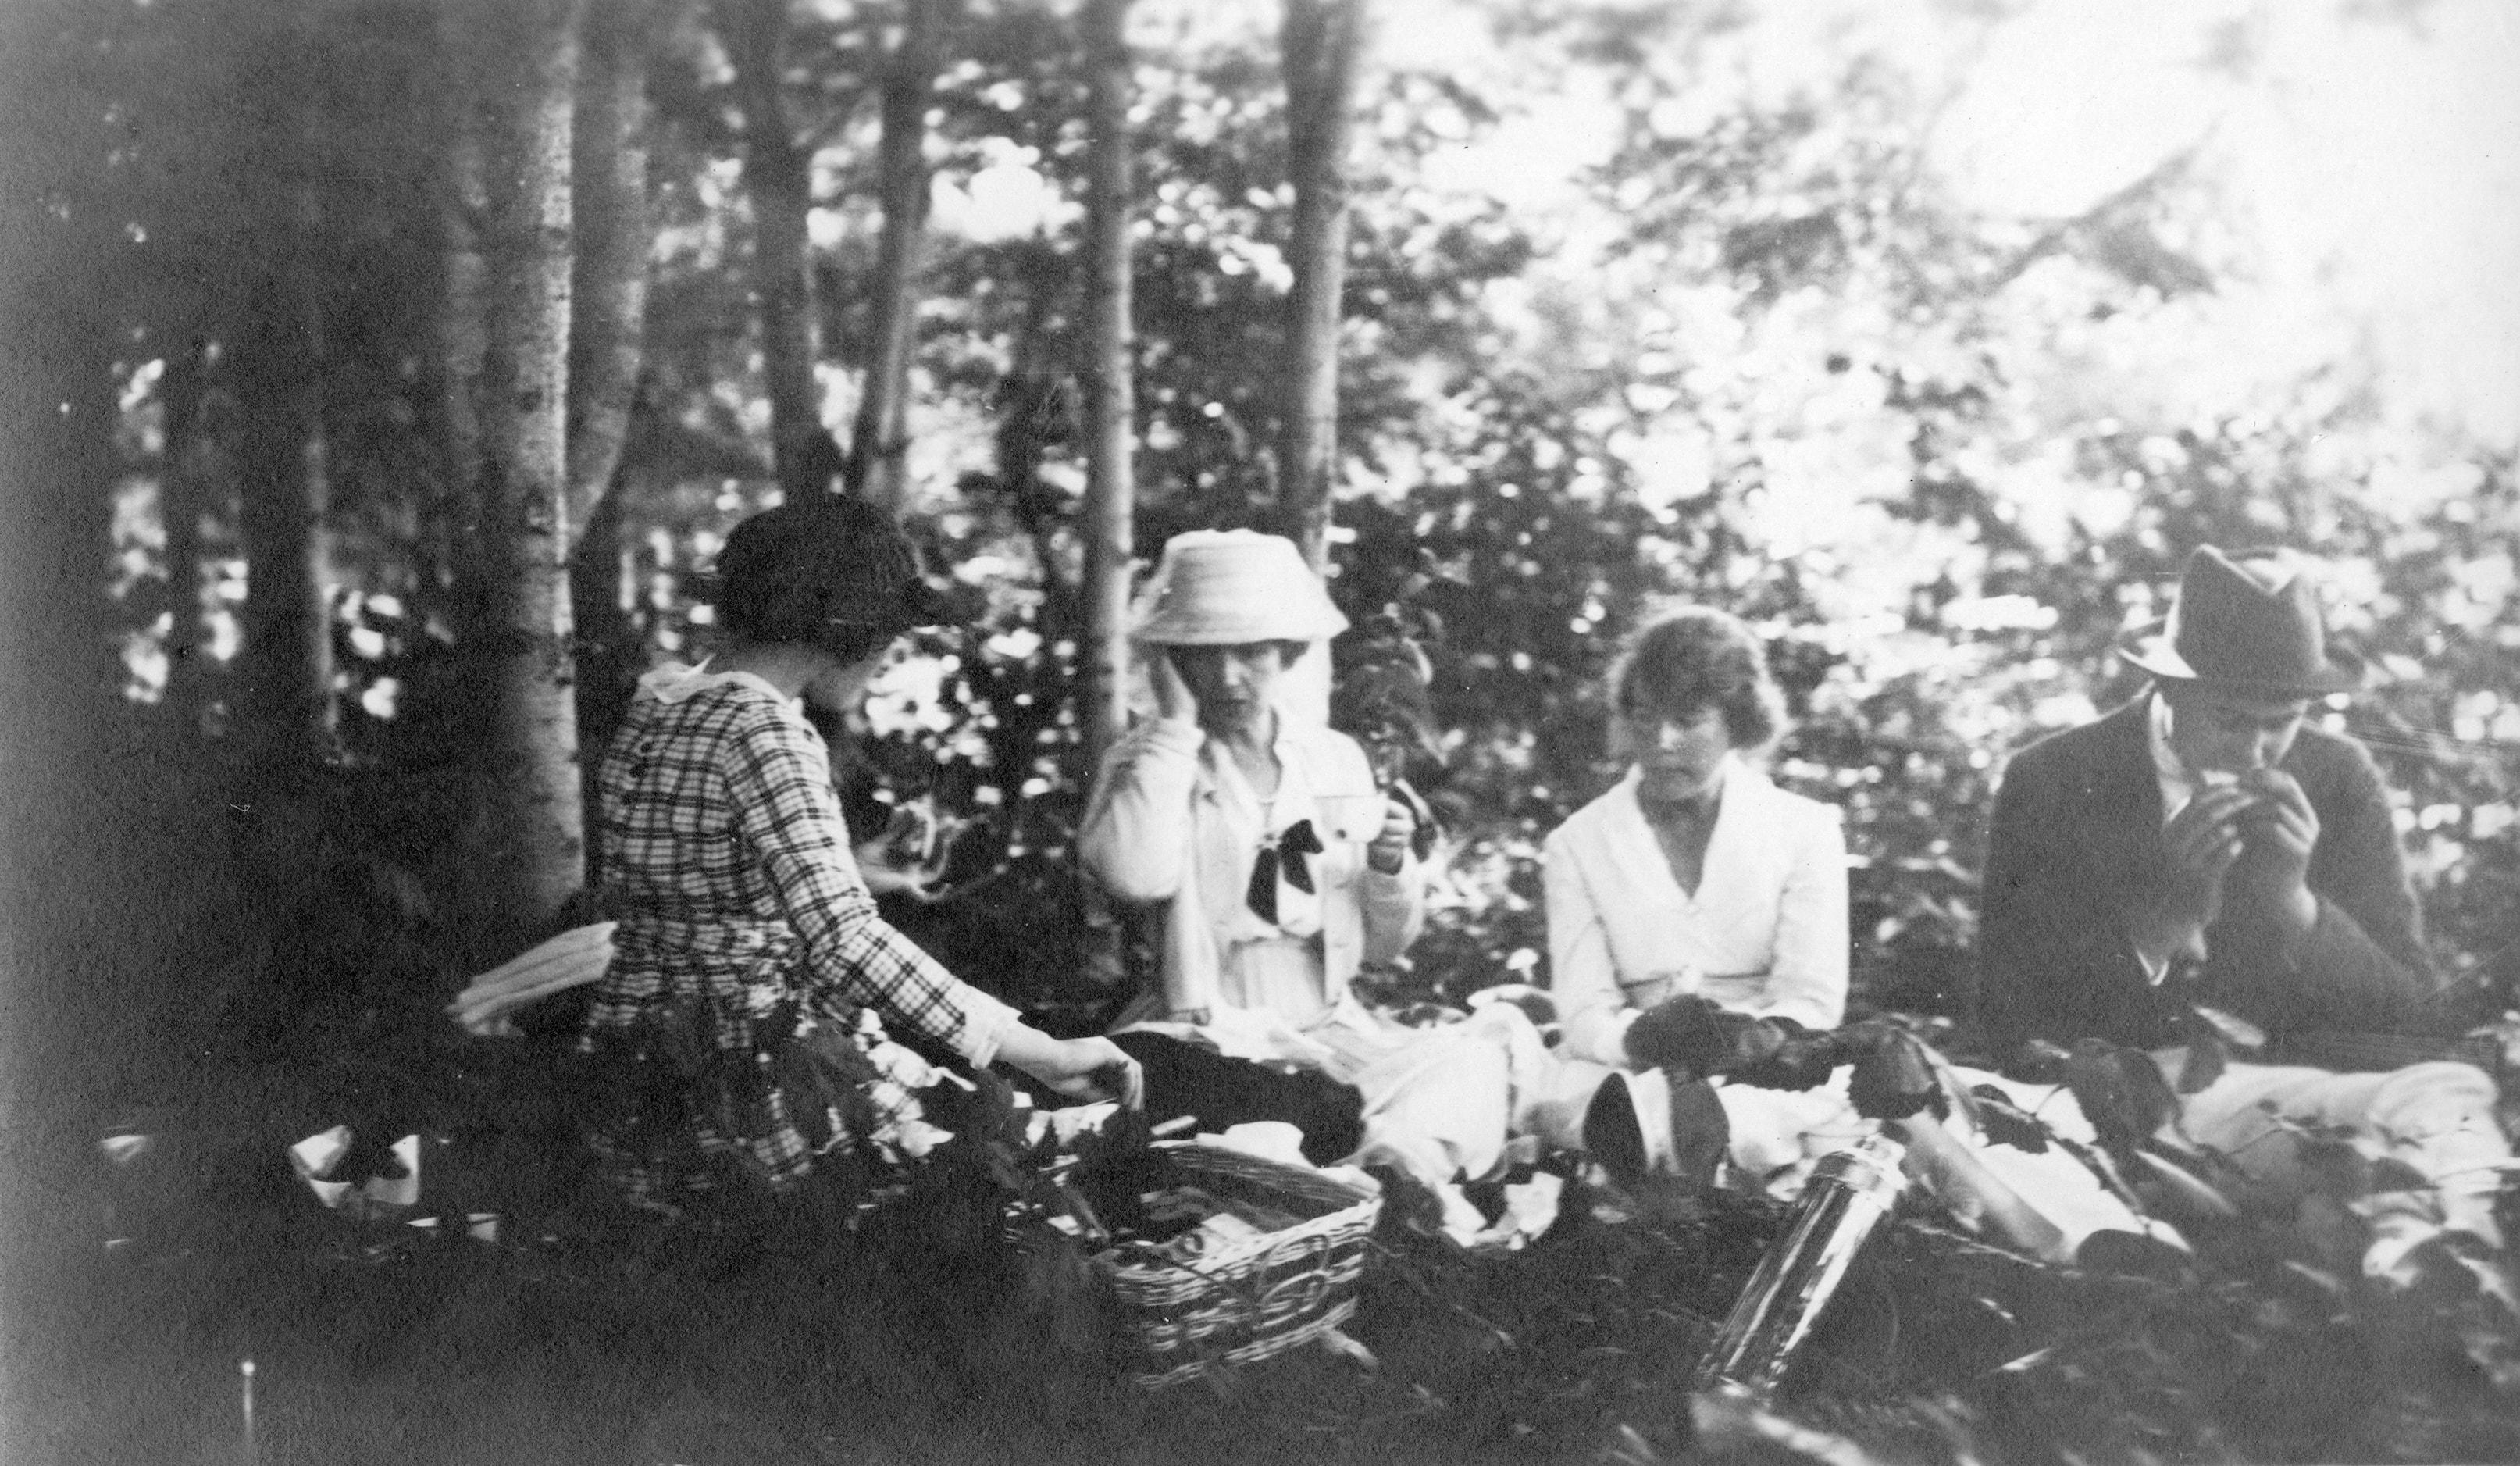 Three women and a man are sitting in the woods having a picnic. A basket and a thermos bottle are in the foreground.